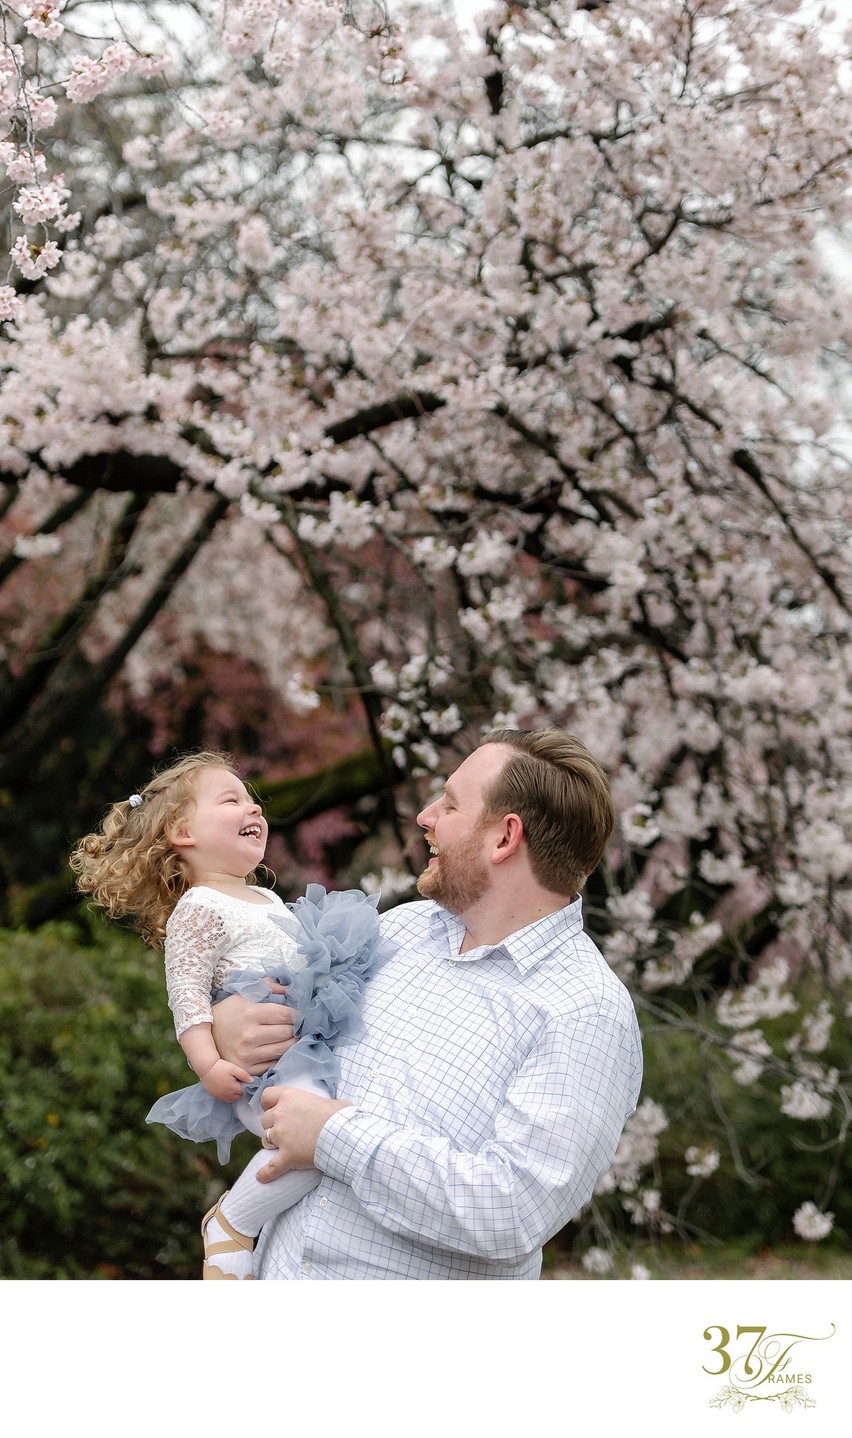 Love and Blooms: Father-Daughter Portraits in Tokyo